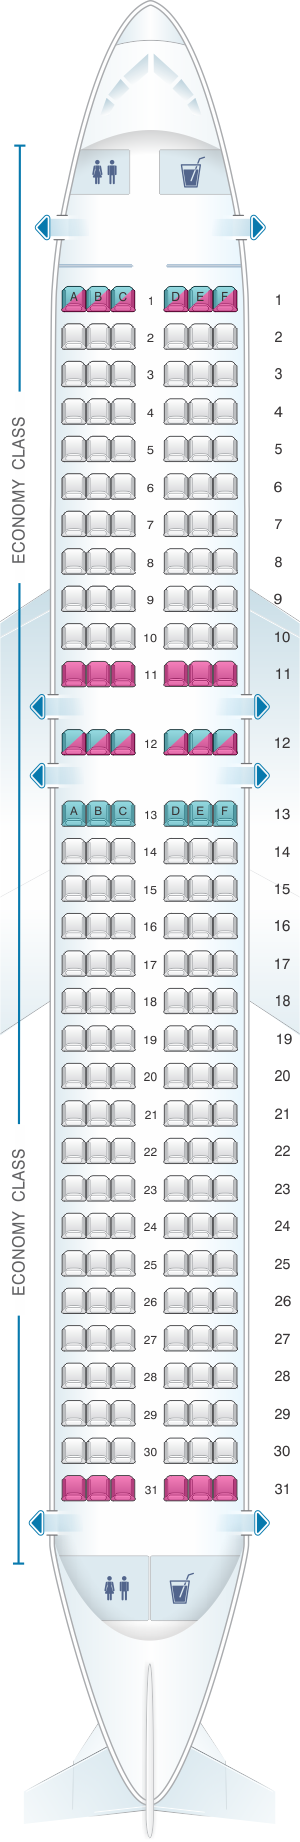 Seat map for Easyjet Airbus A320neo